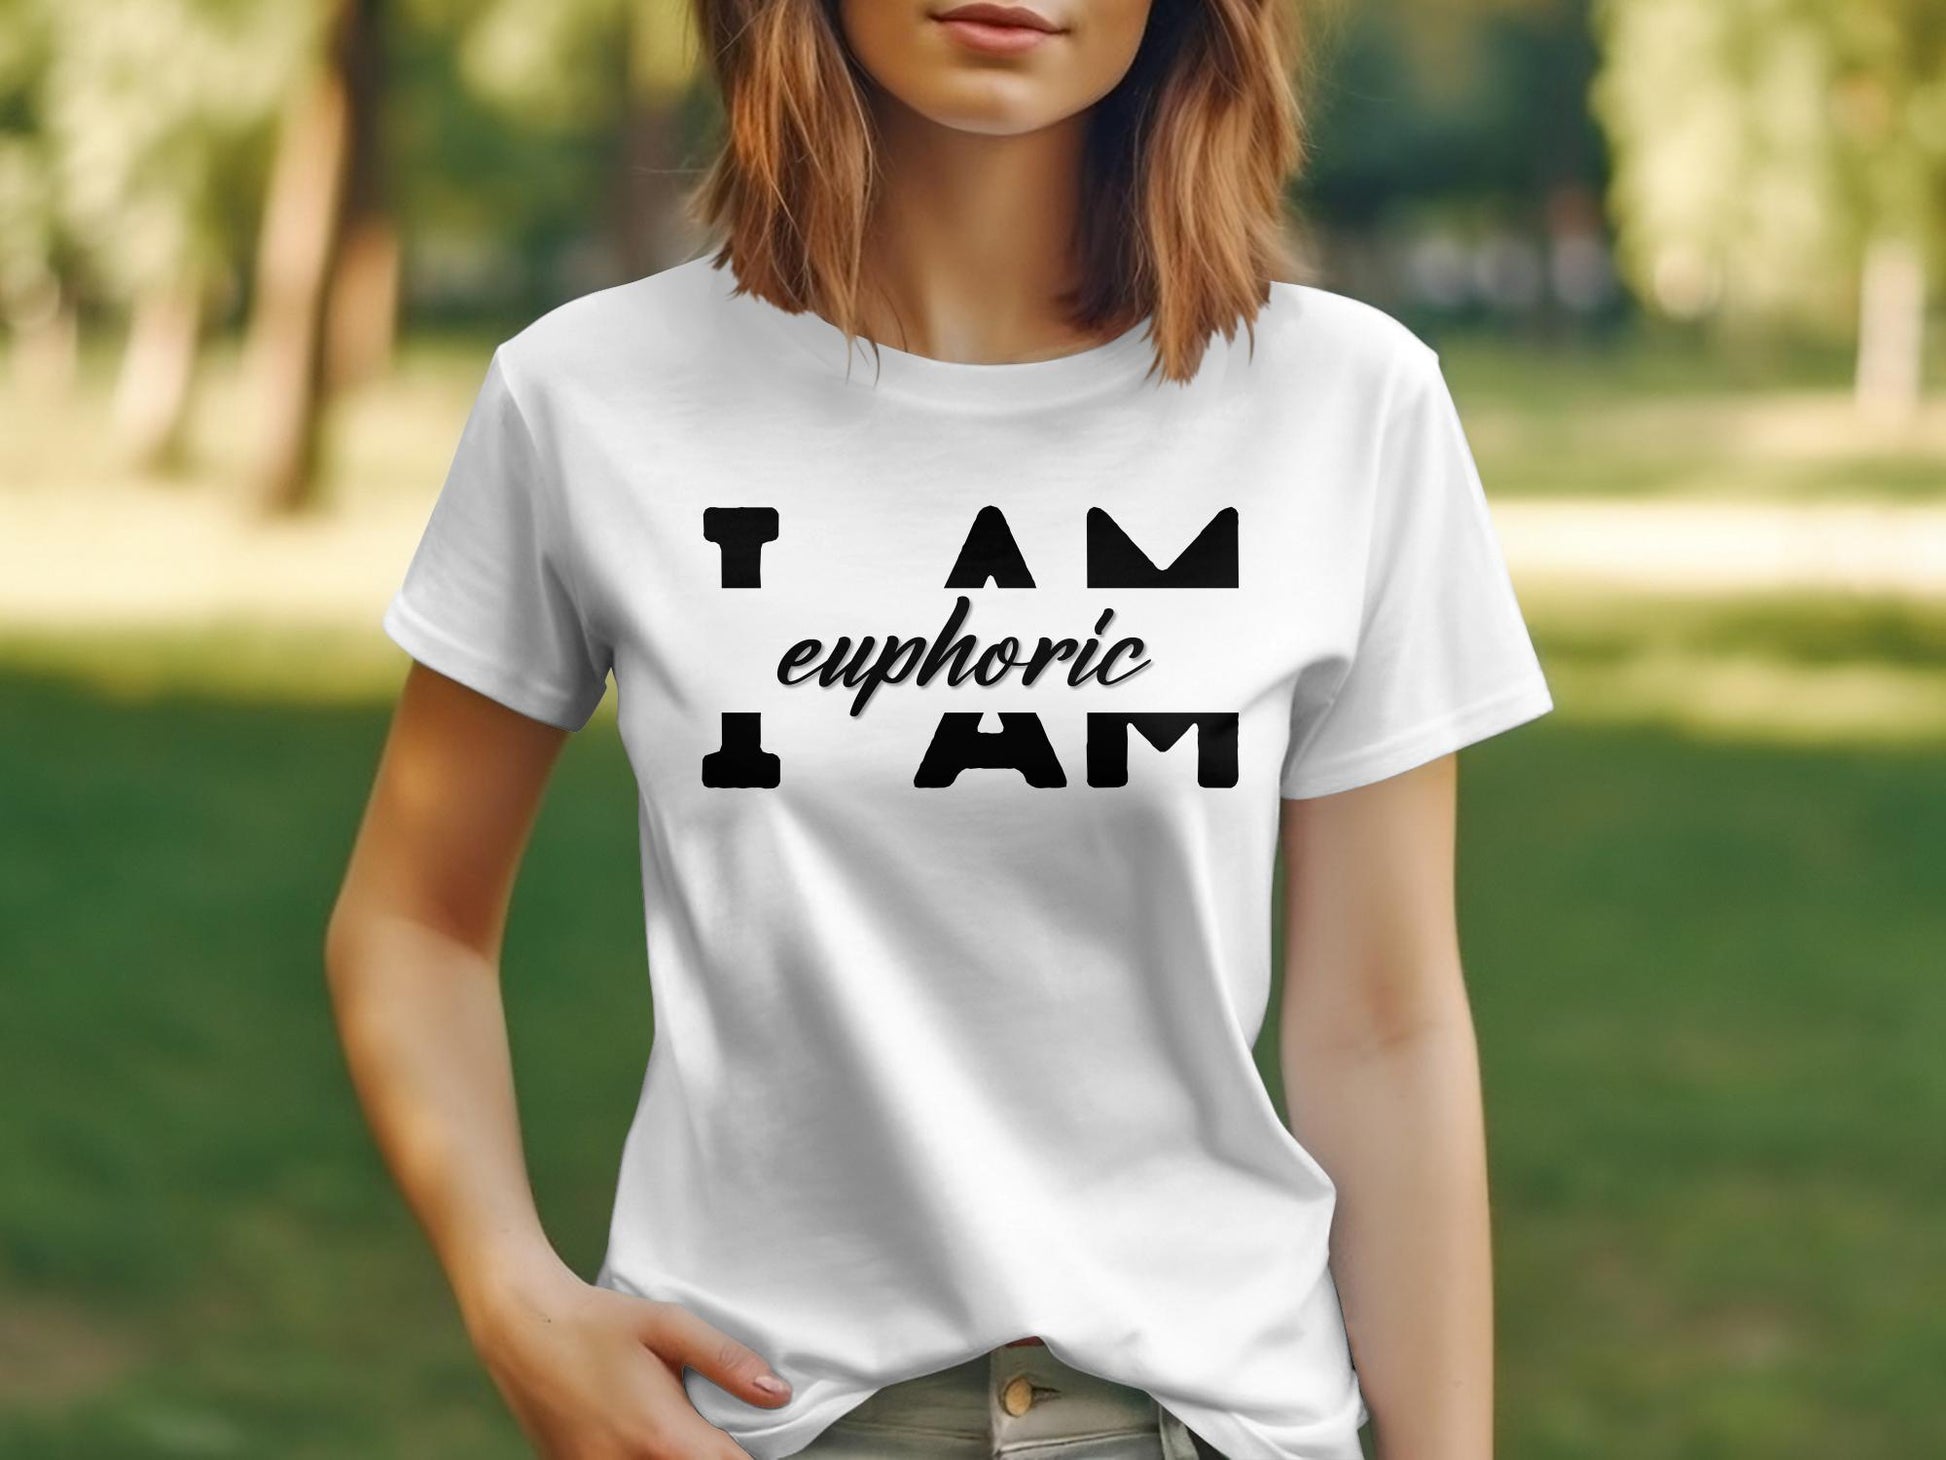 I Am Euphoric- An encouraging and motivating Affirmation Quote T-shirt